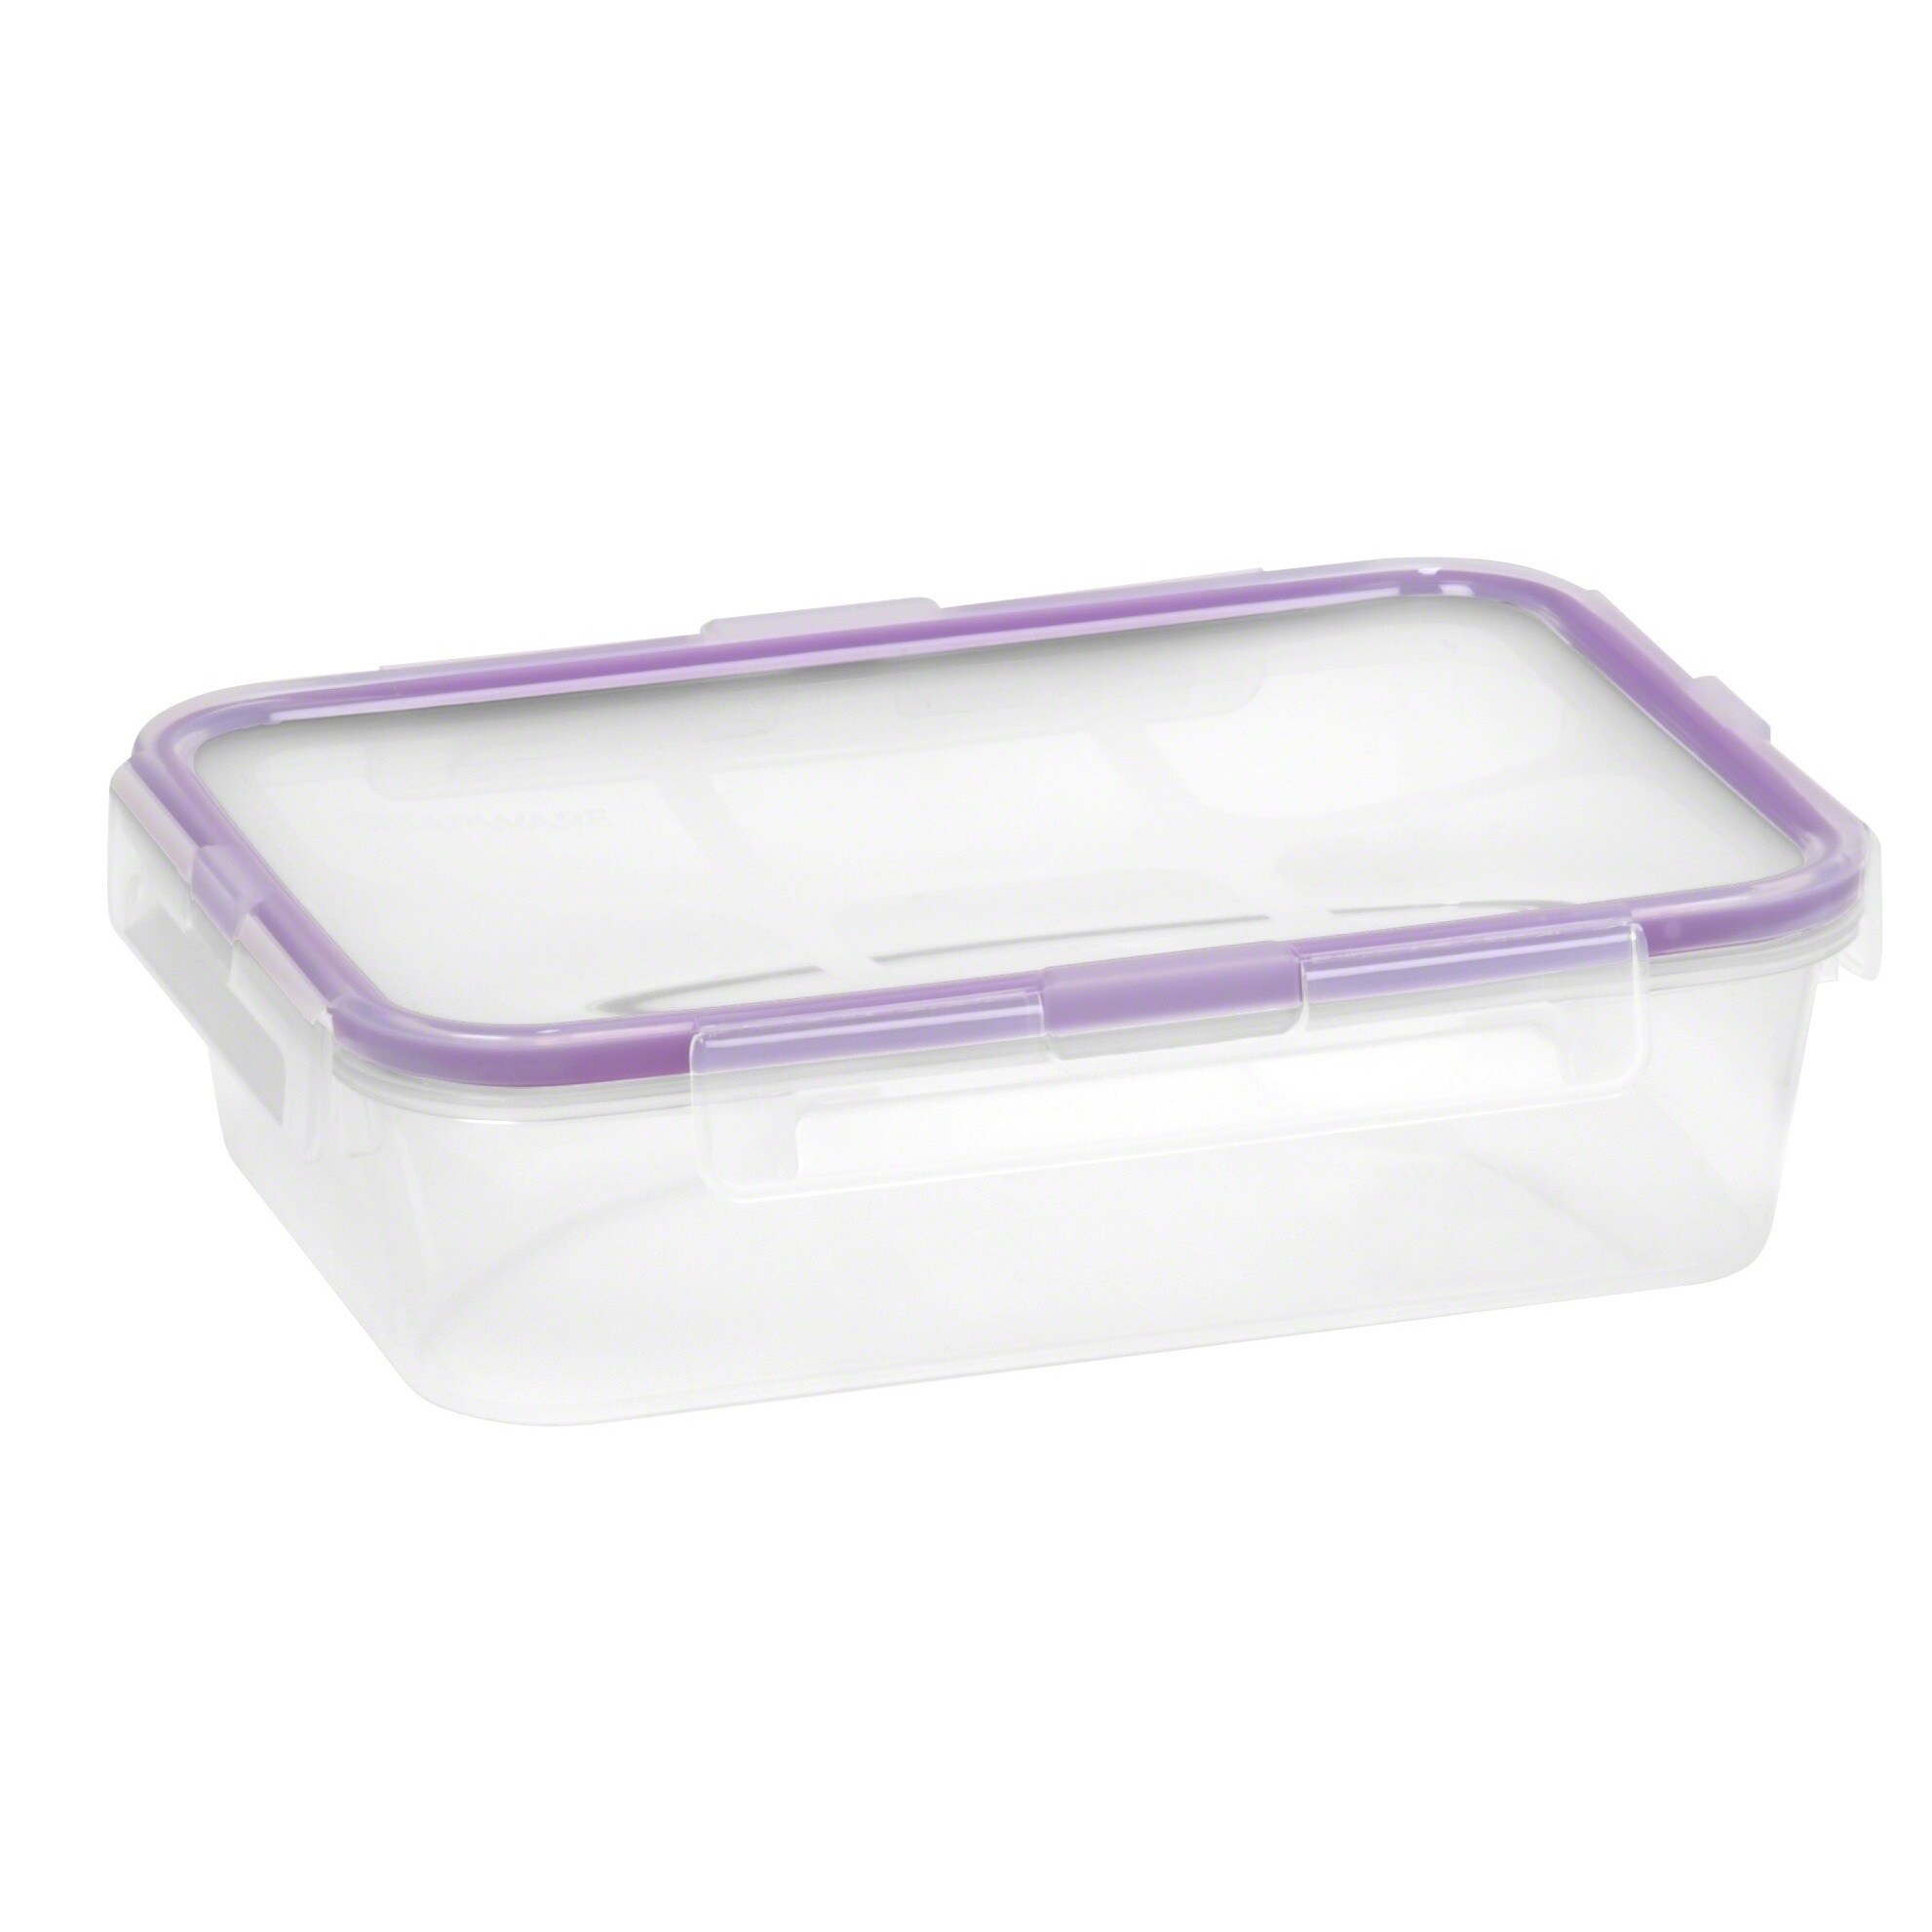 Snapware Food Storage Container, 4.7 Cups, Shop